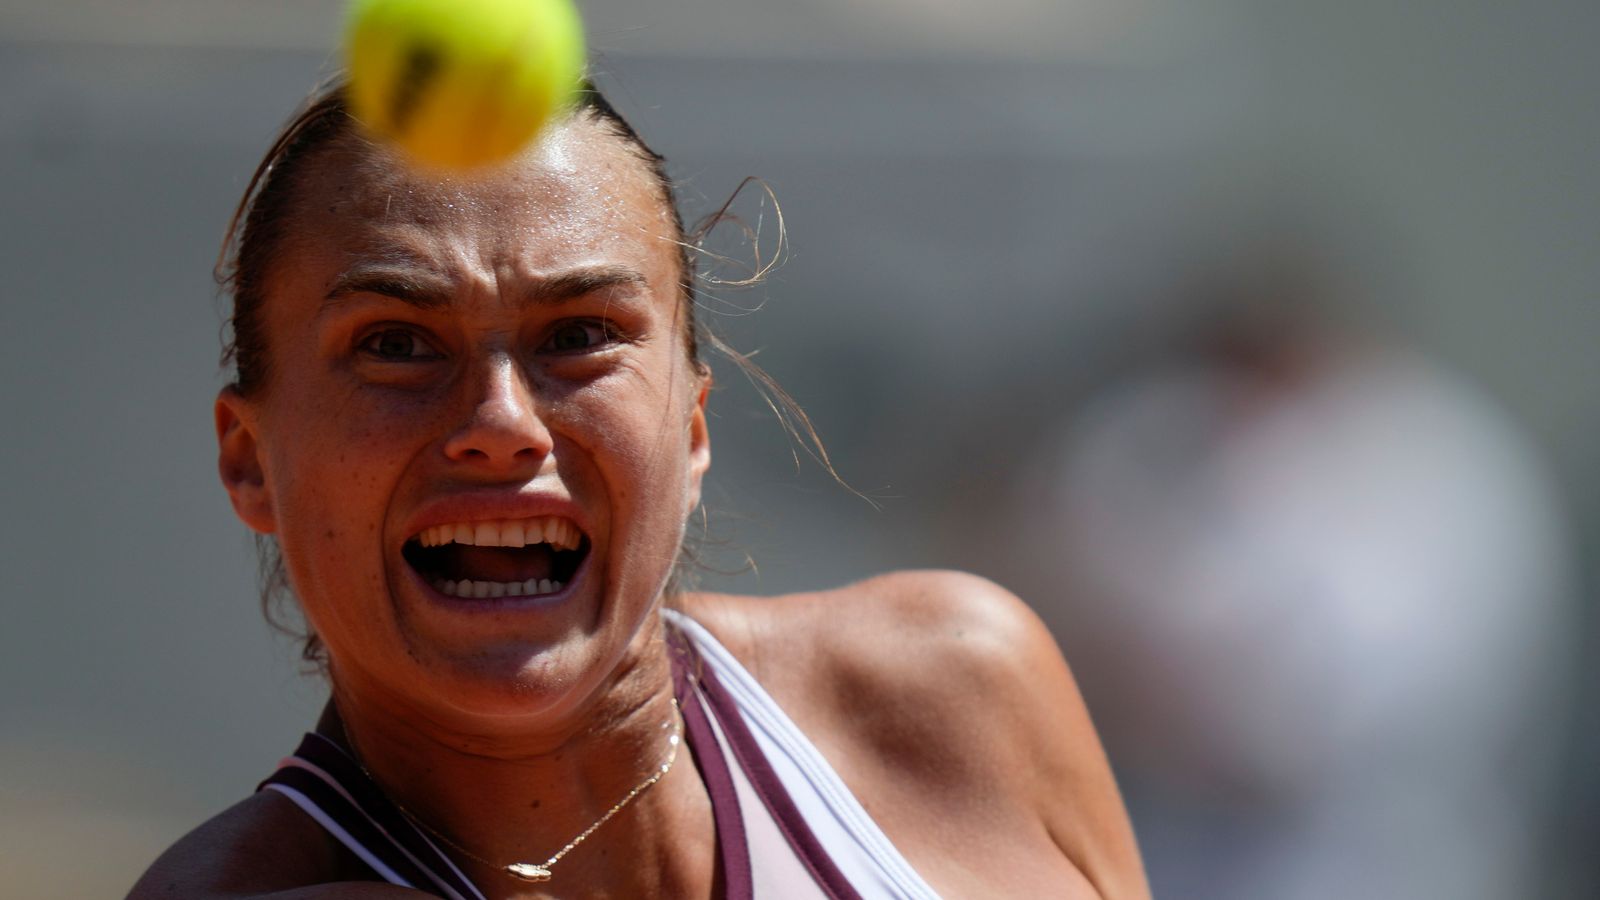 French Open: Aryna Sabalenka skips post-match press conference citing 'mental health' and safety concerns | Tennis News